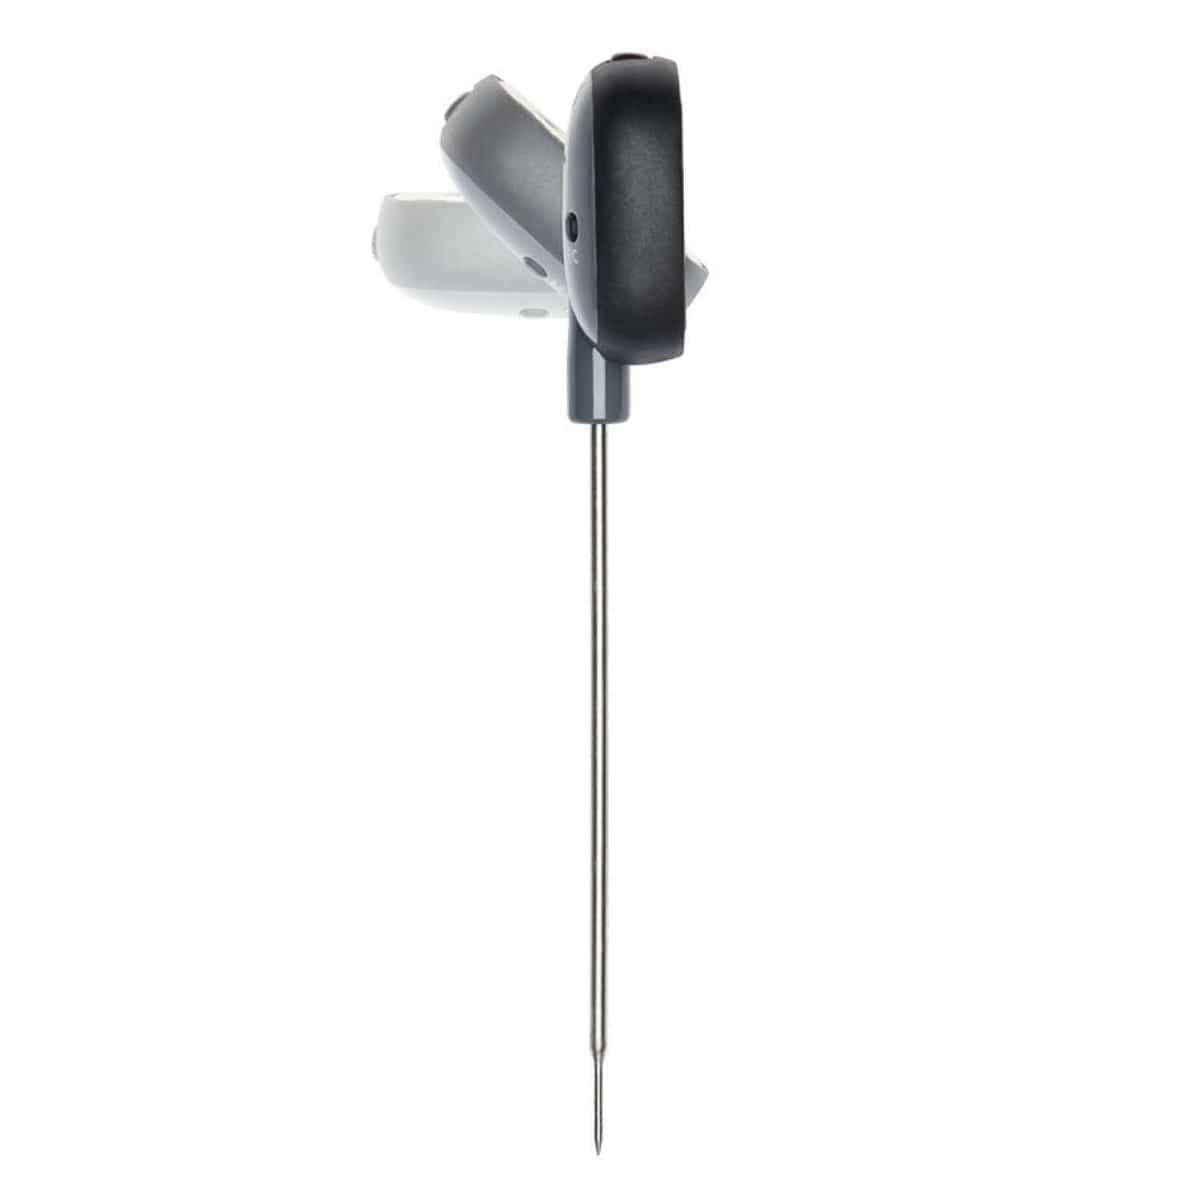 OXO Good Grips Analog Instant Read Thermometer